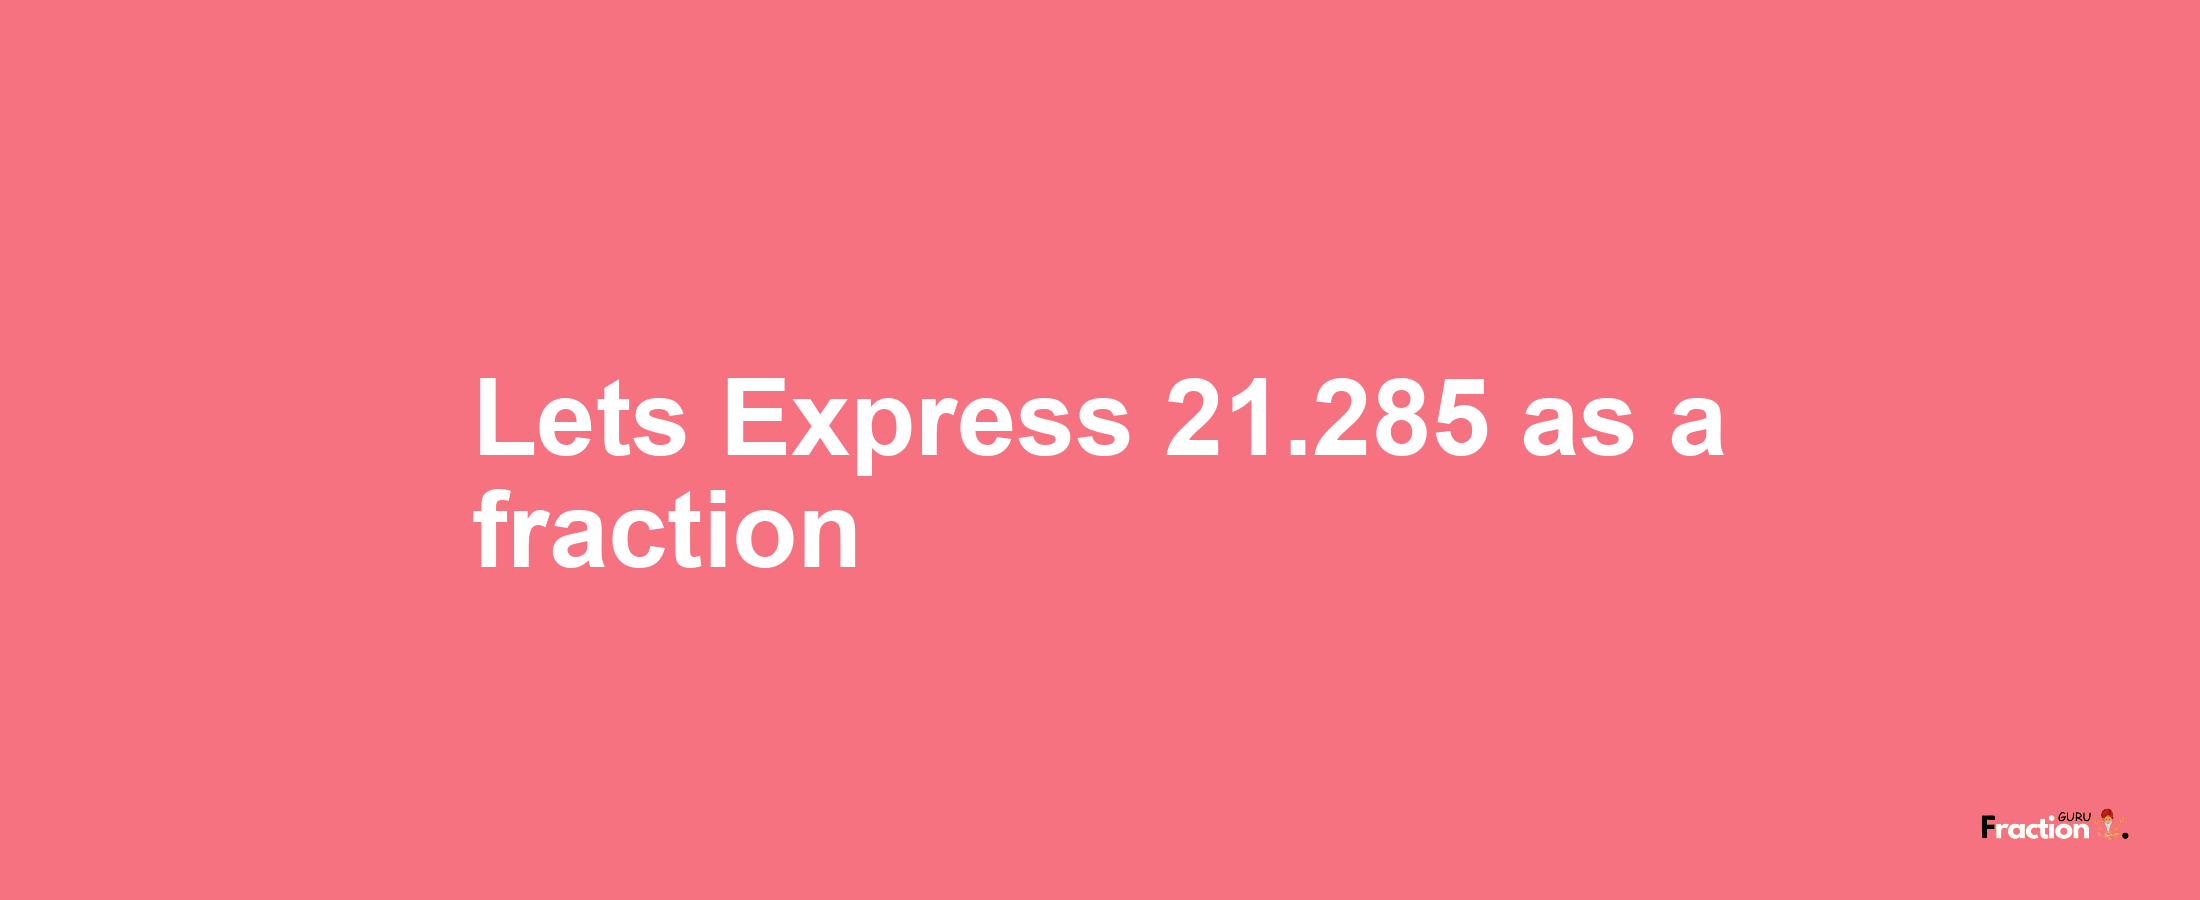 Lets Express 21.285 as afraction